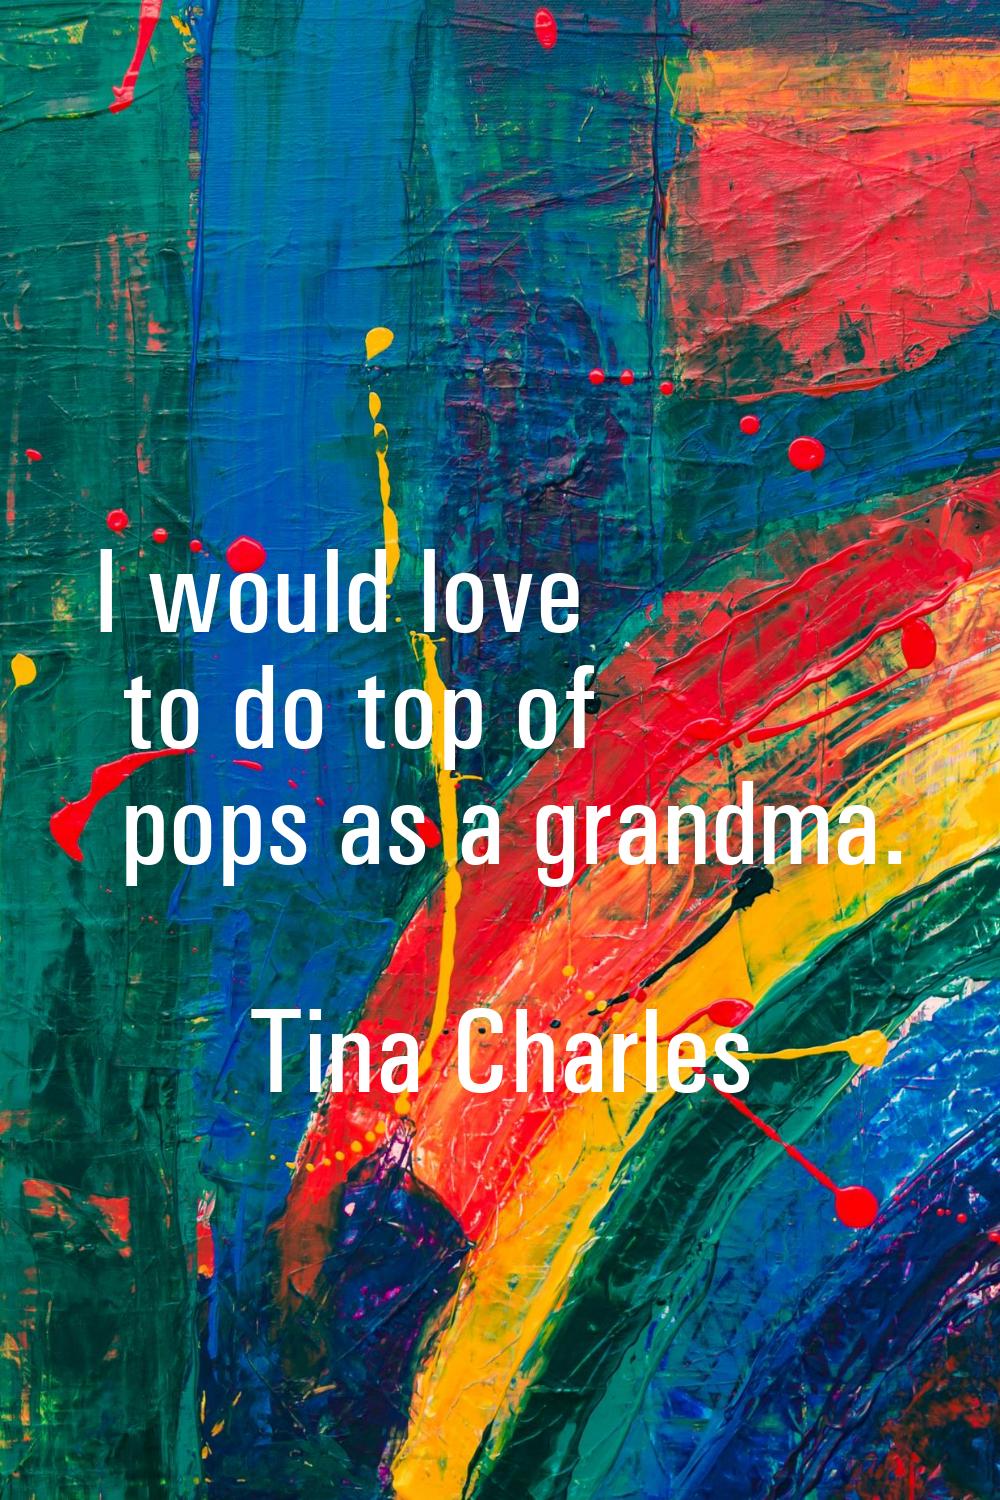 I would love to do top of pops as a grandma.